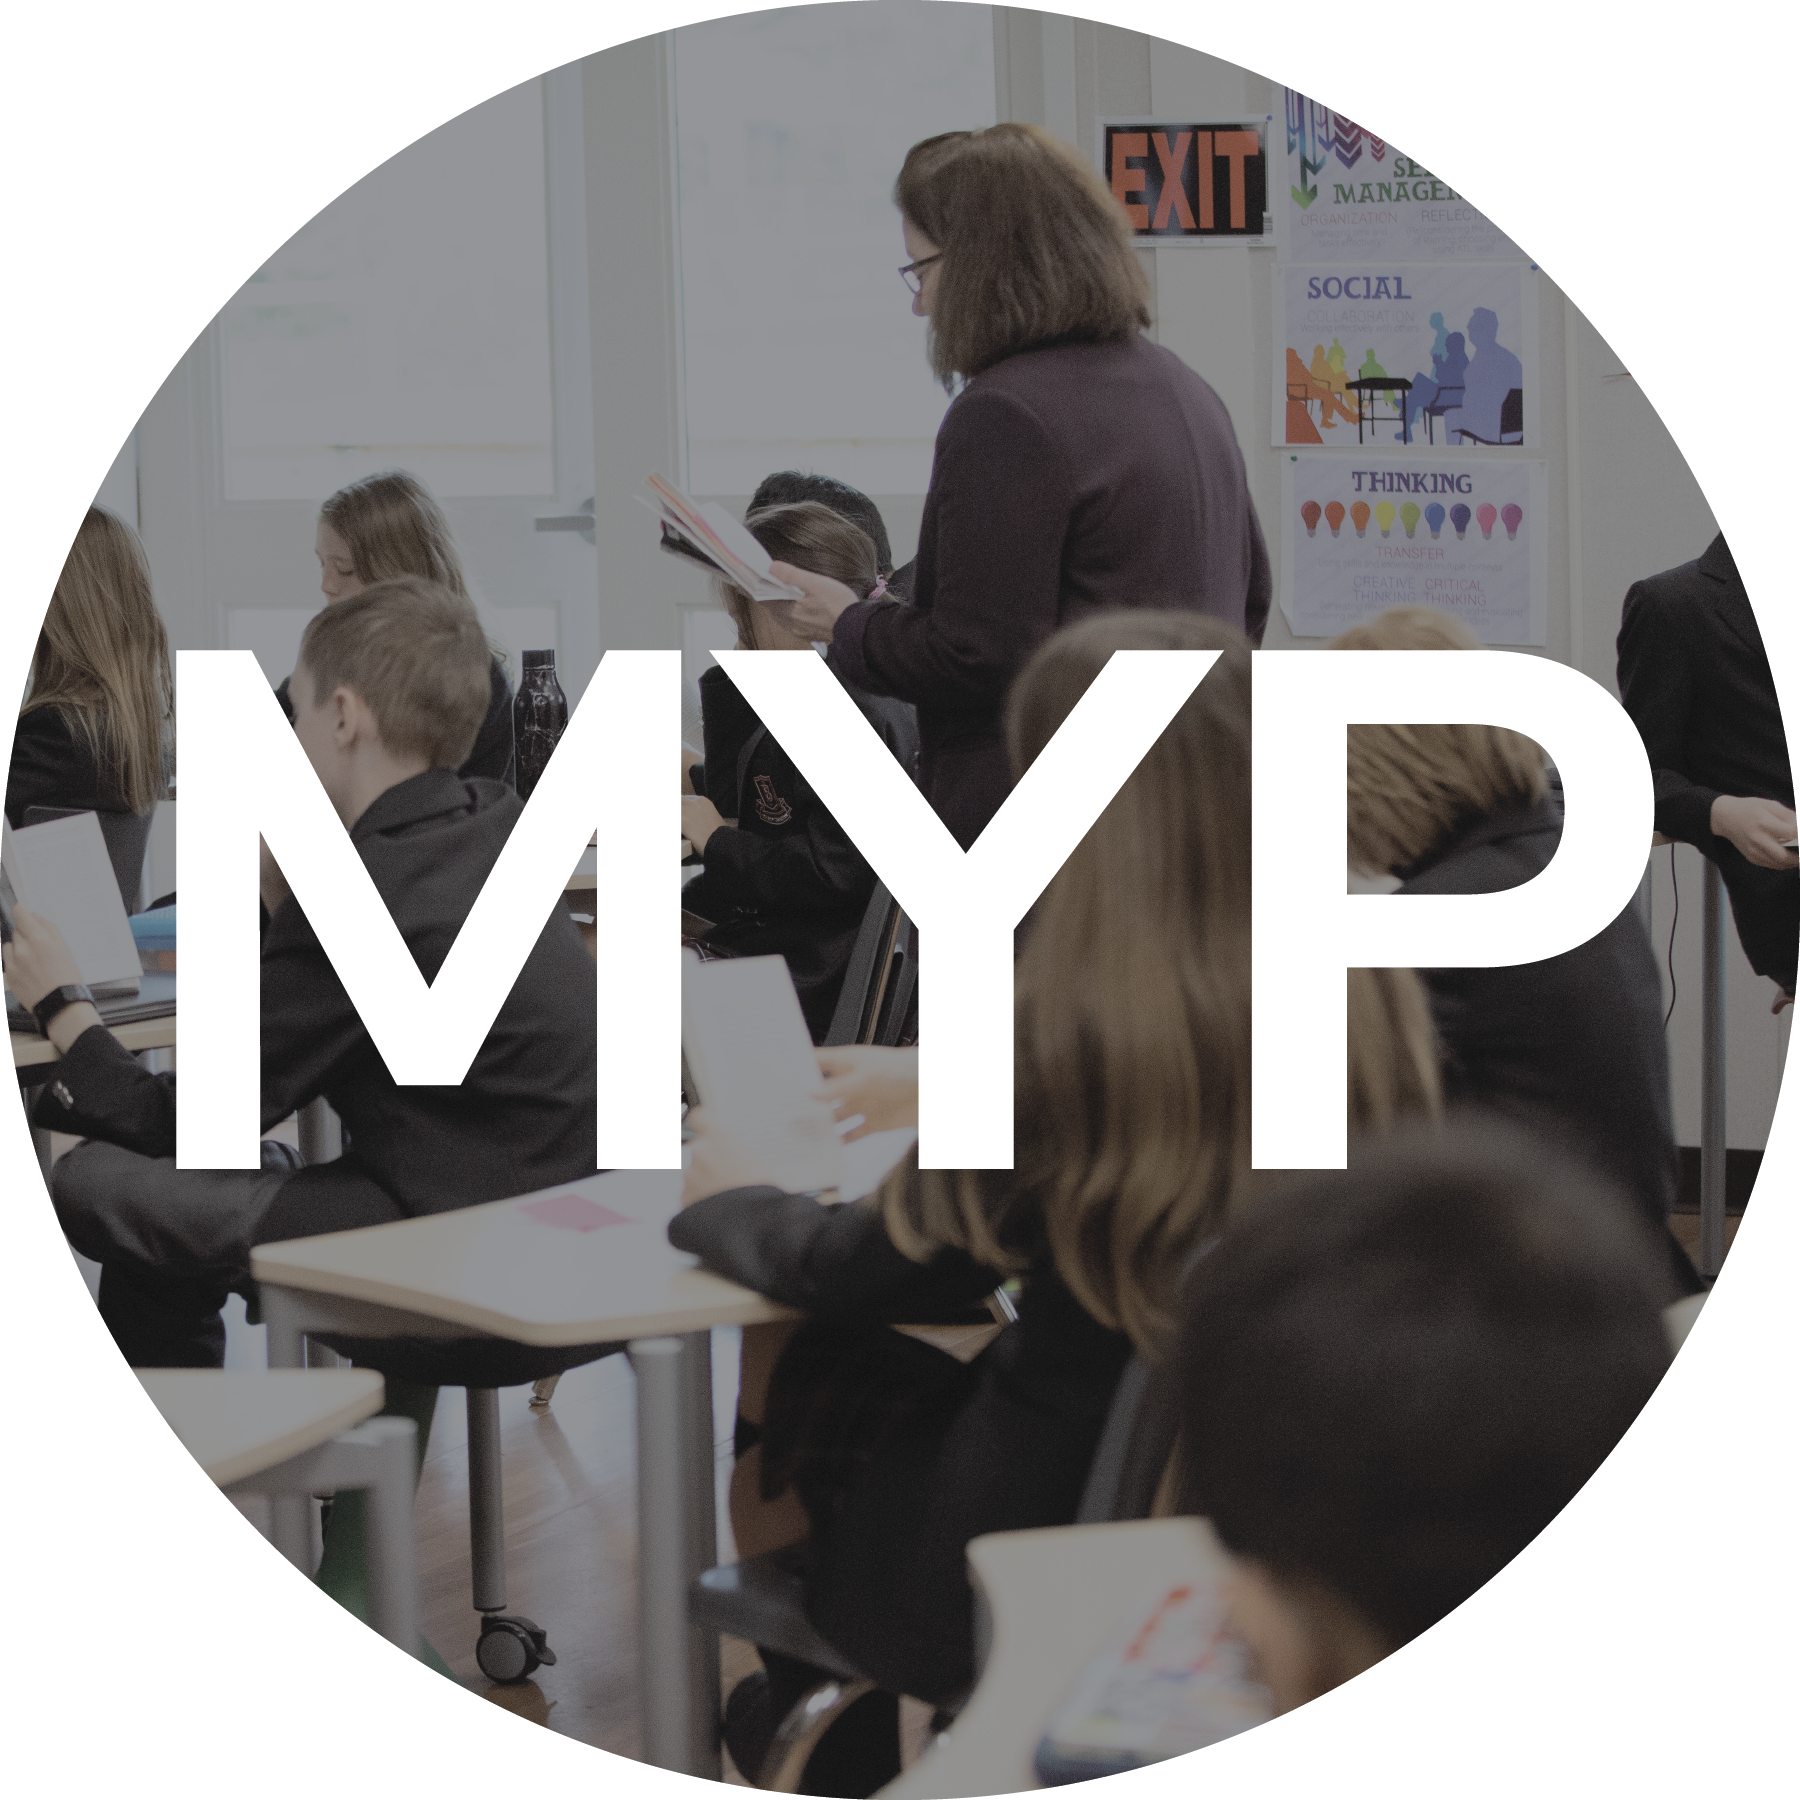 Click the image to watch our informational video on the MYP